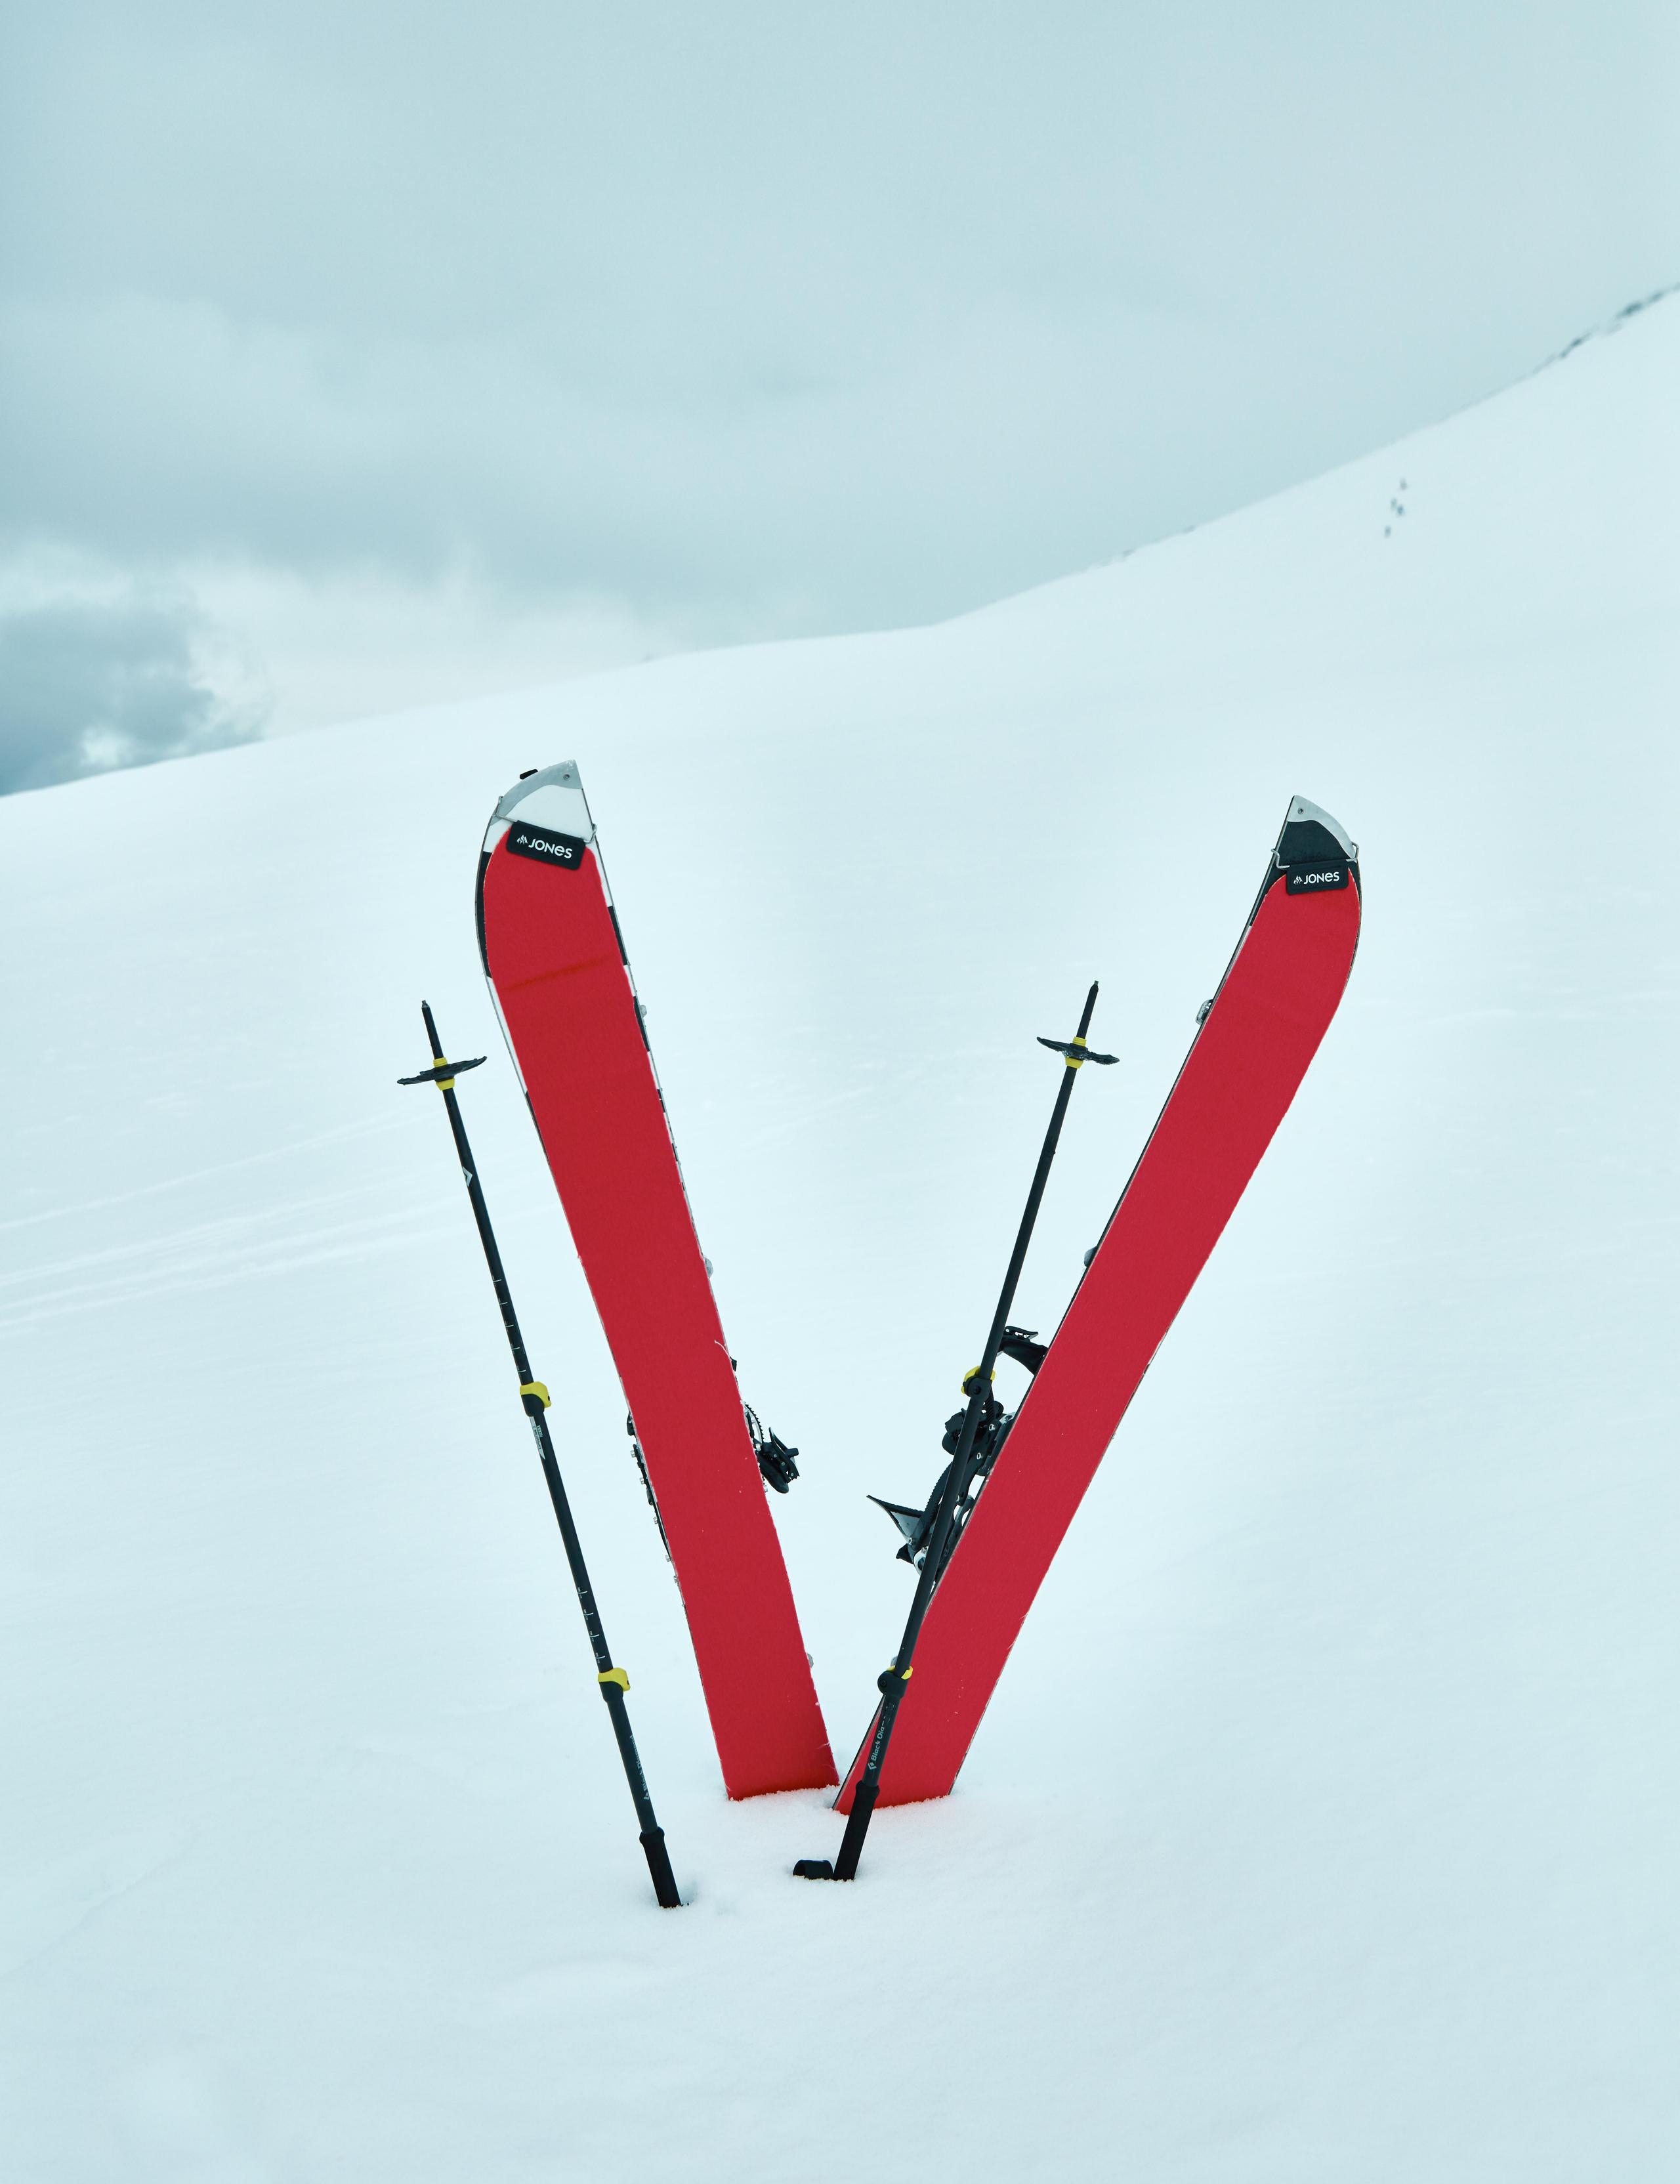 Two red skis sticking out of snowy landscape in the shape of a V